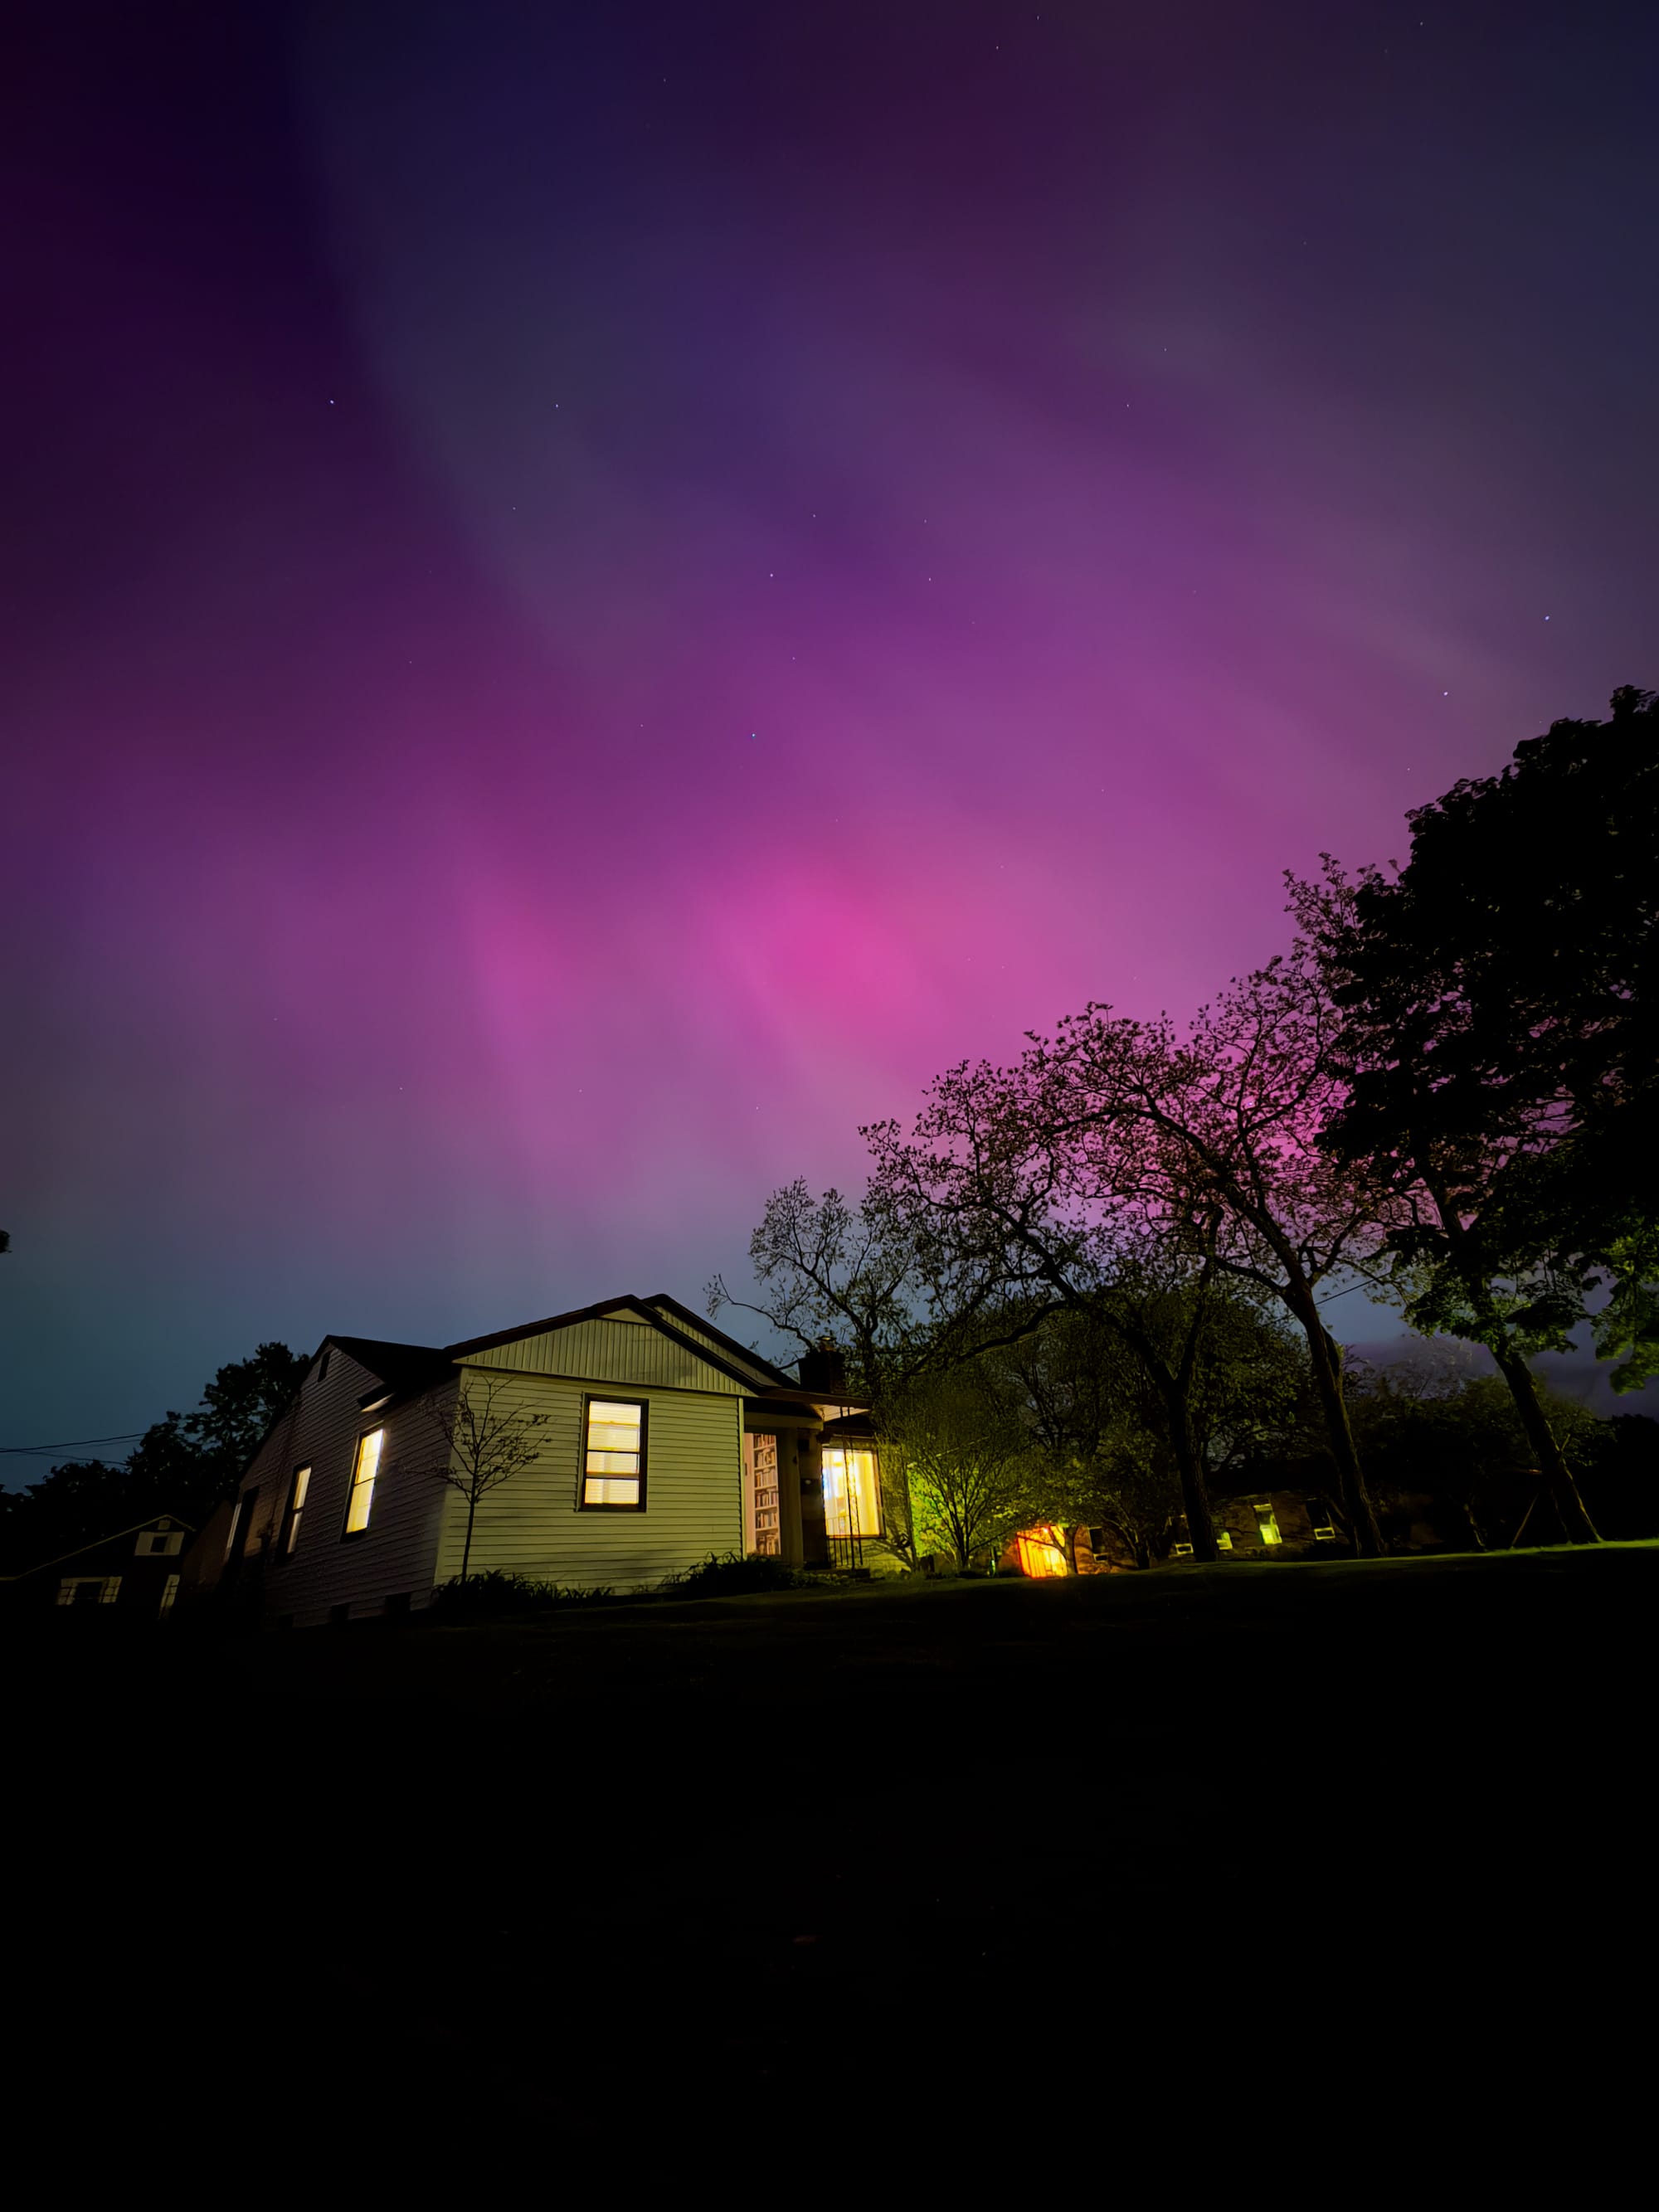 The difference of seeing the northern lights at home